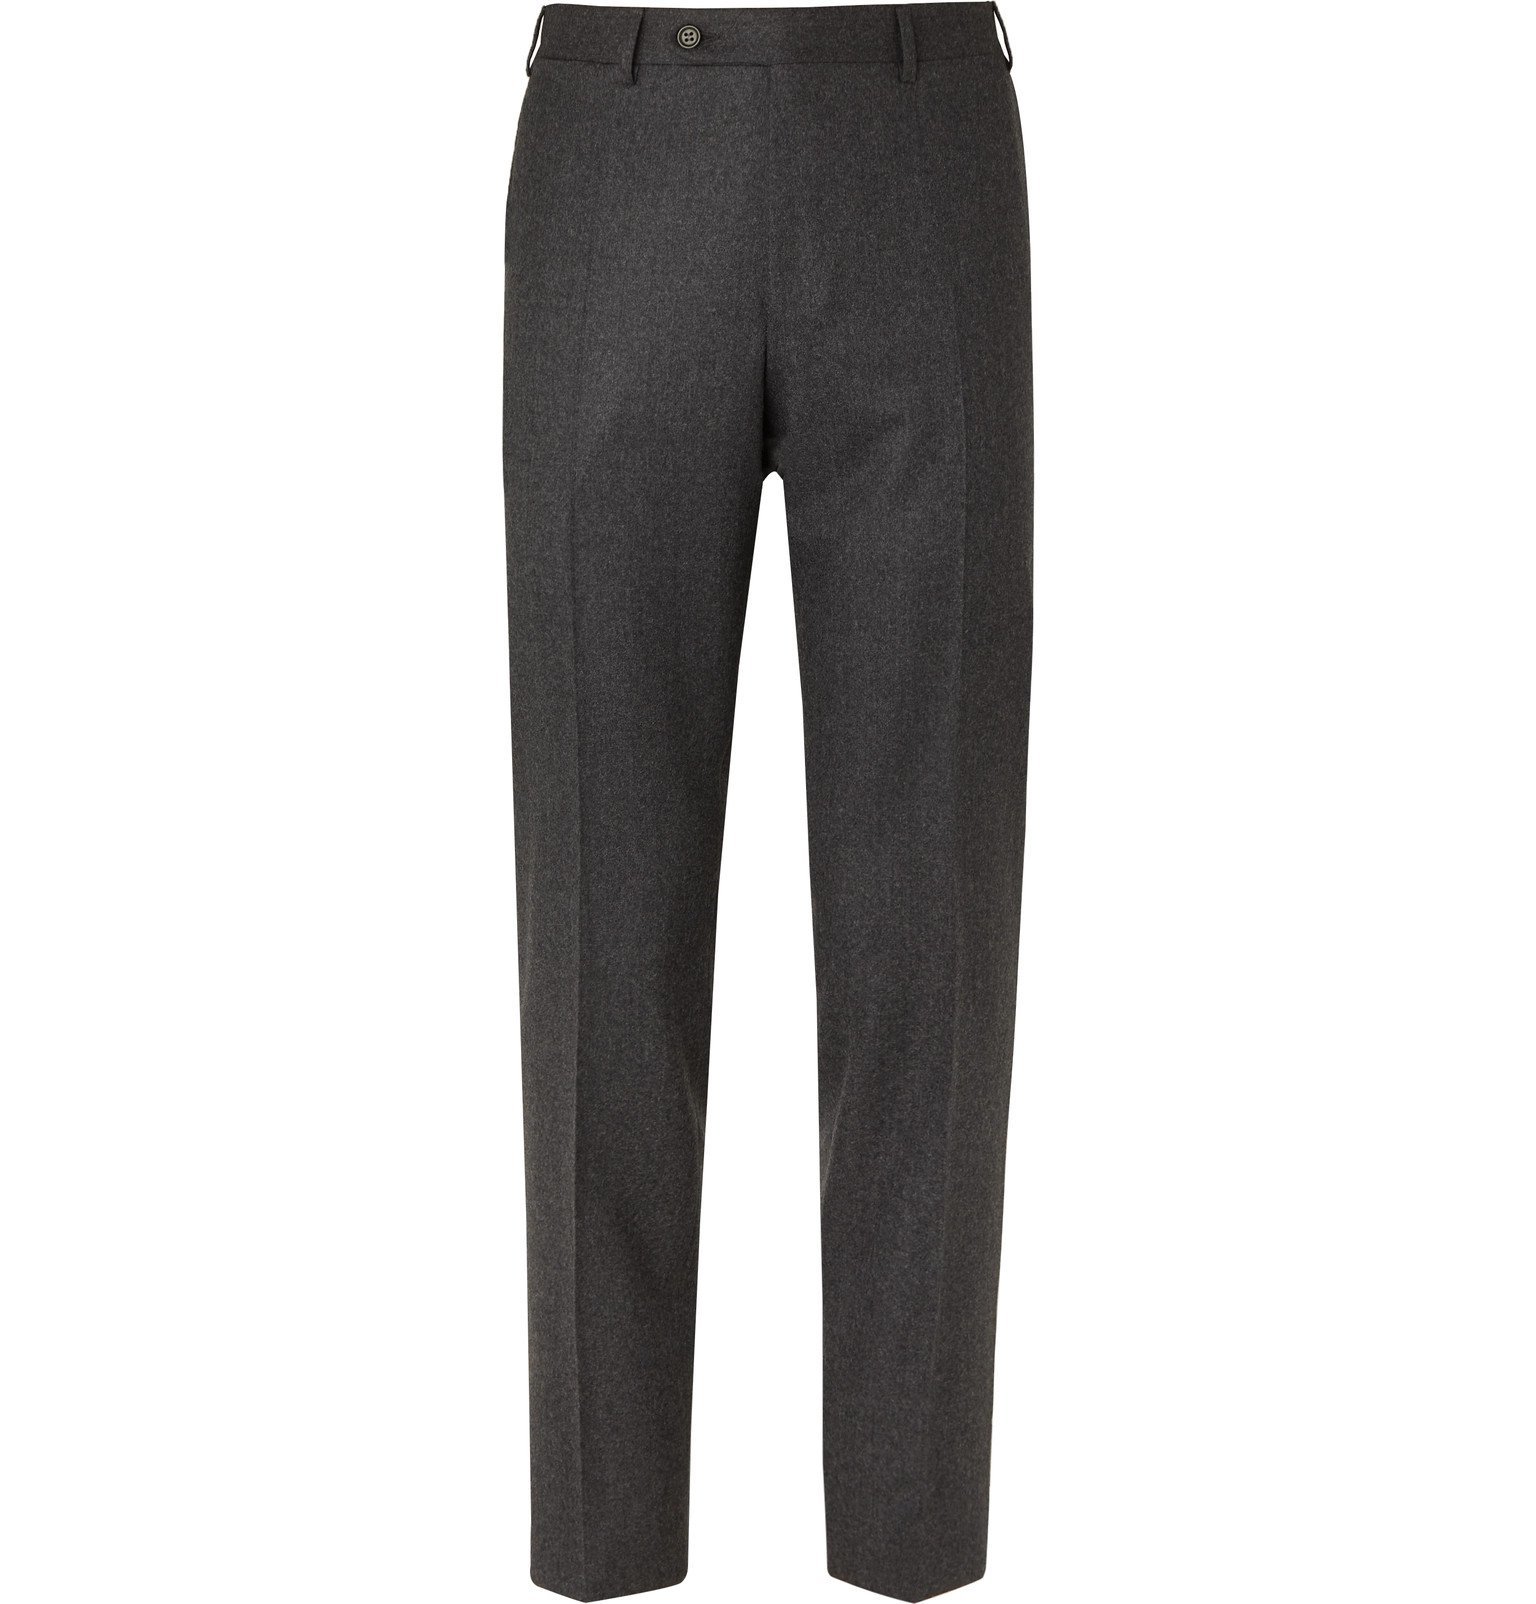 Canali - Grey Slim-Fit Wool-Flannel Suit Trousers - Gray Canali